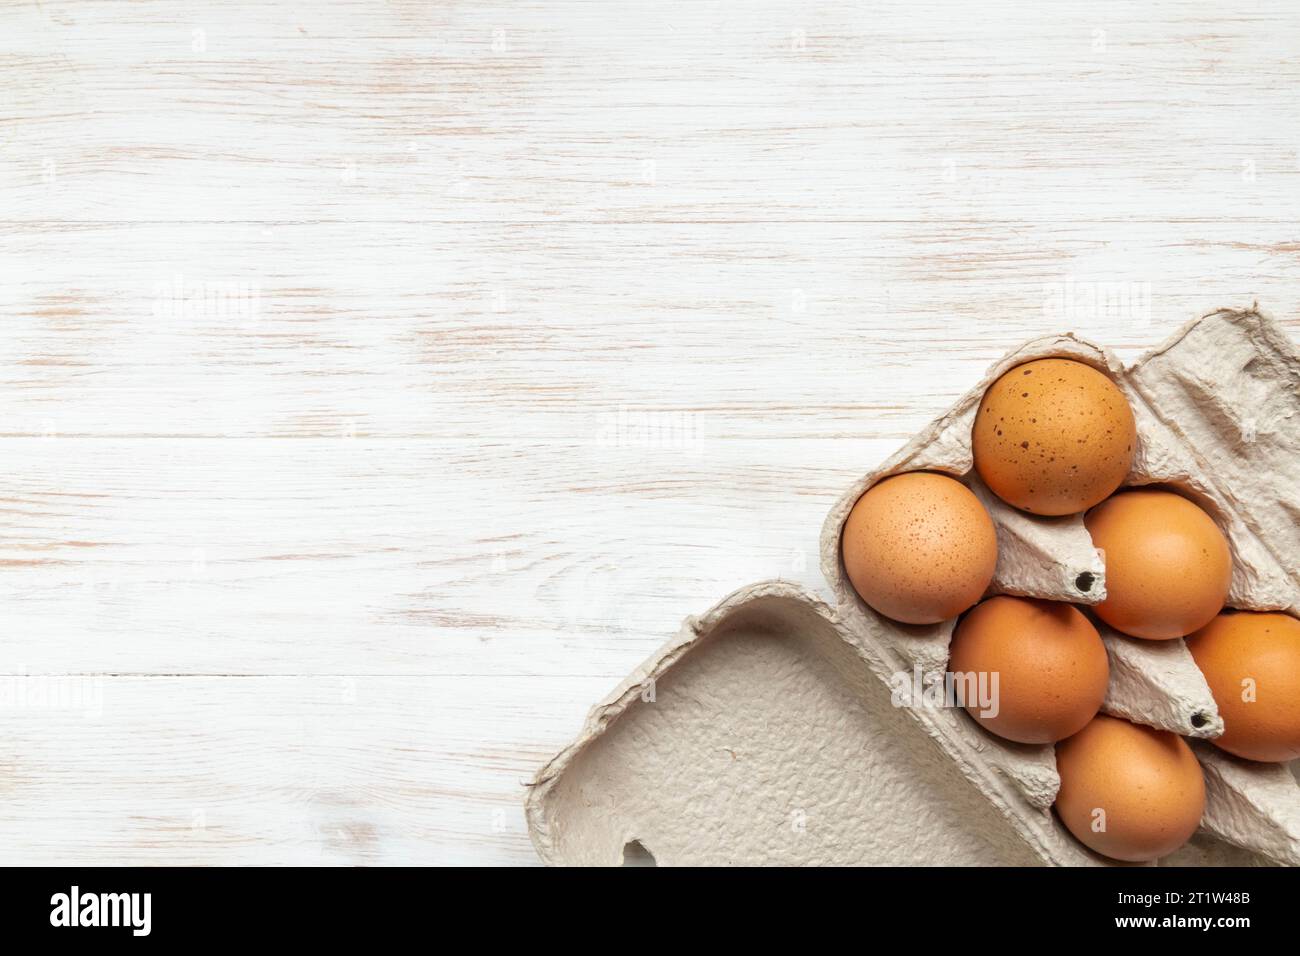 Brown eggs in open carton box on wooden background. Fresh organic chicken eggs in carton pack. Top view with copy space. Natural healthy food and orga Stock Photo